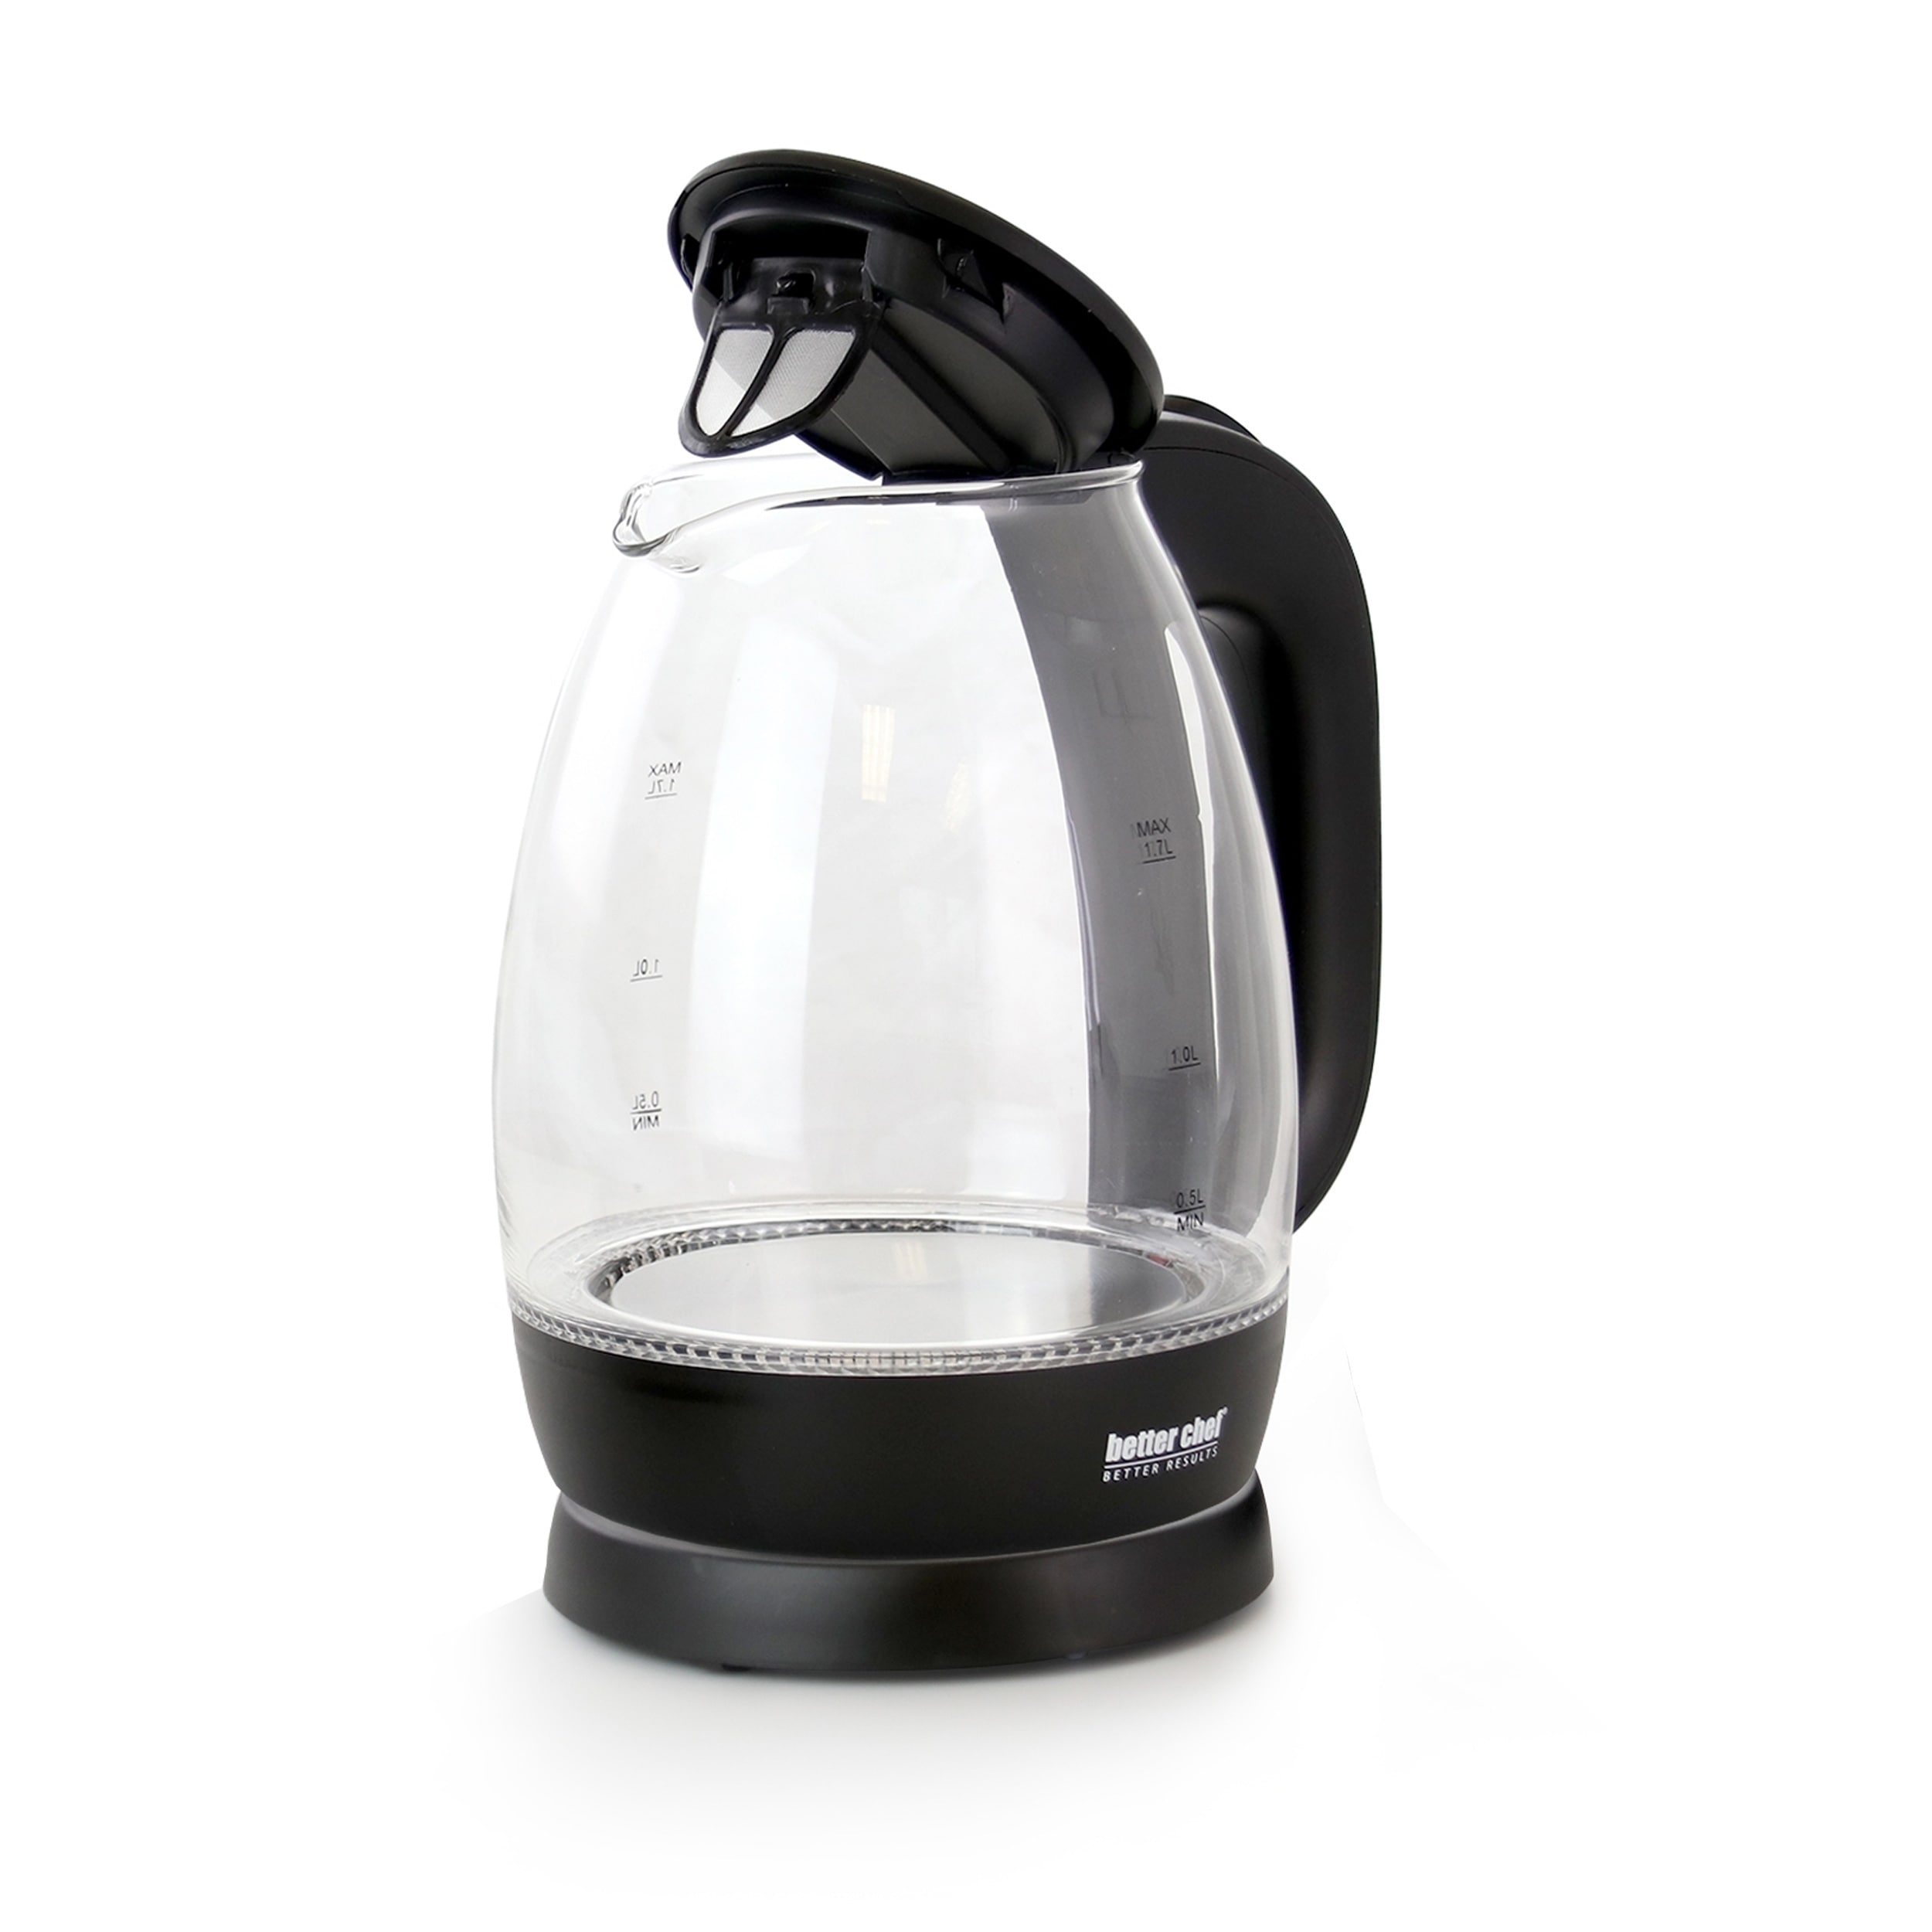 Better Chef 1.7L Cordless Electric Glass Tea Kettle - On Sale - Bed Bath &  Beyond - 32175696